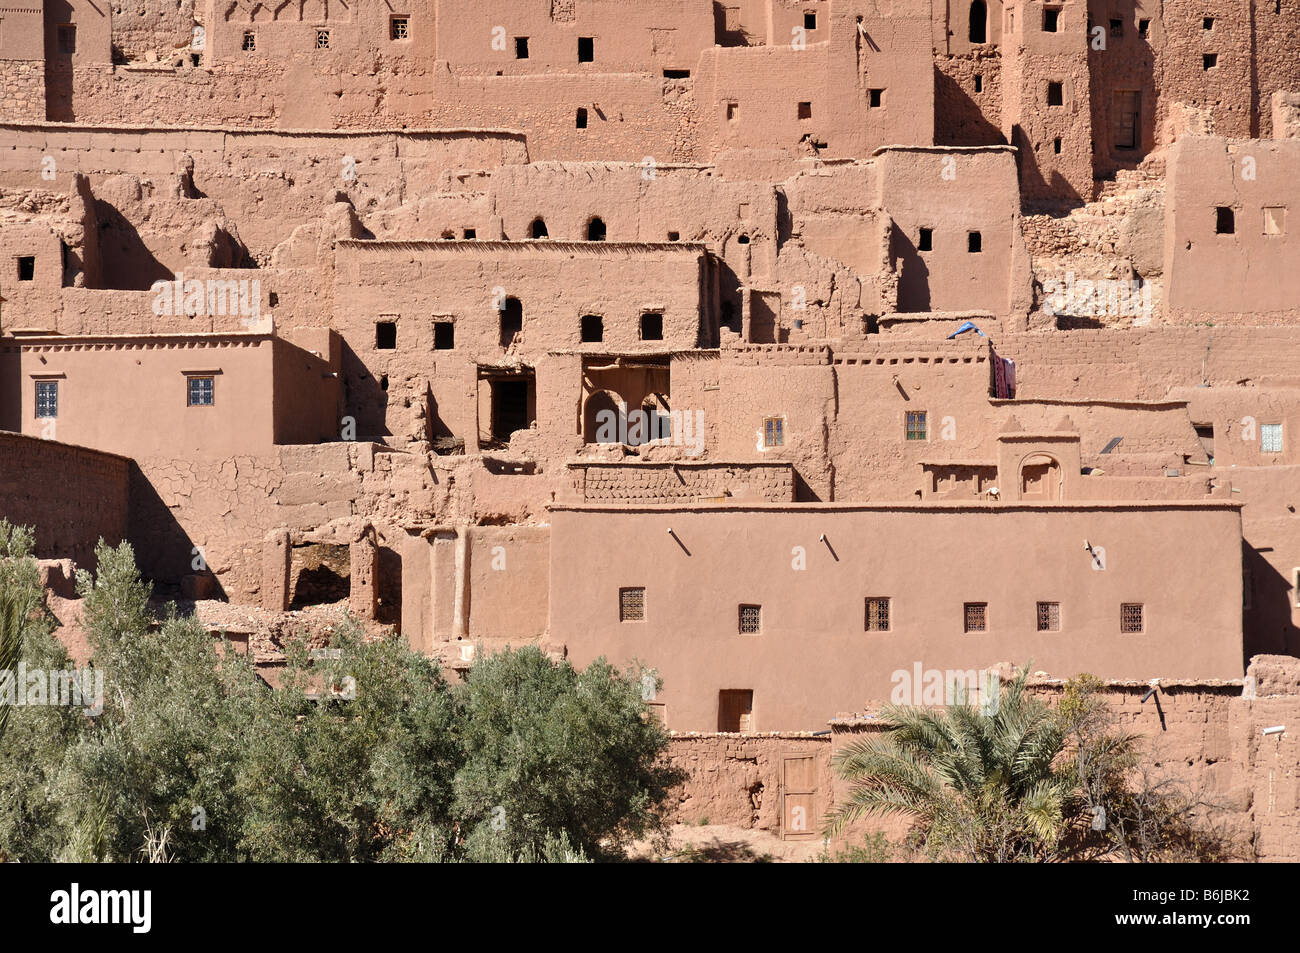 The Kasbah of Ait Benhaddou, Morocco Africa Stock Photo